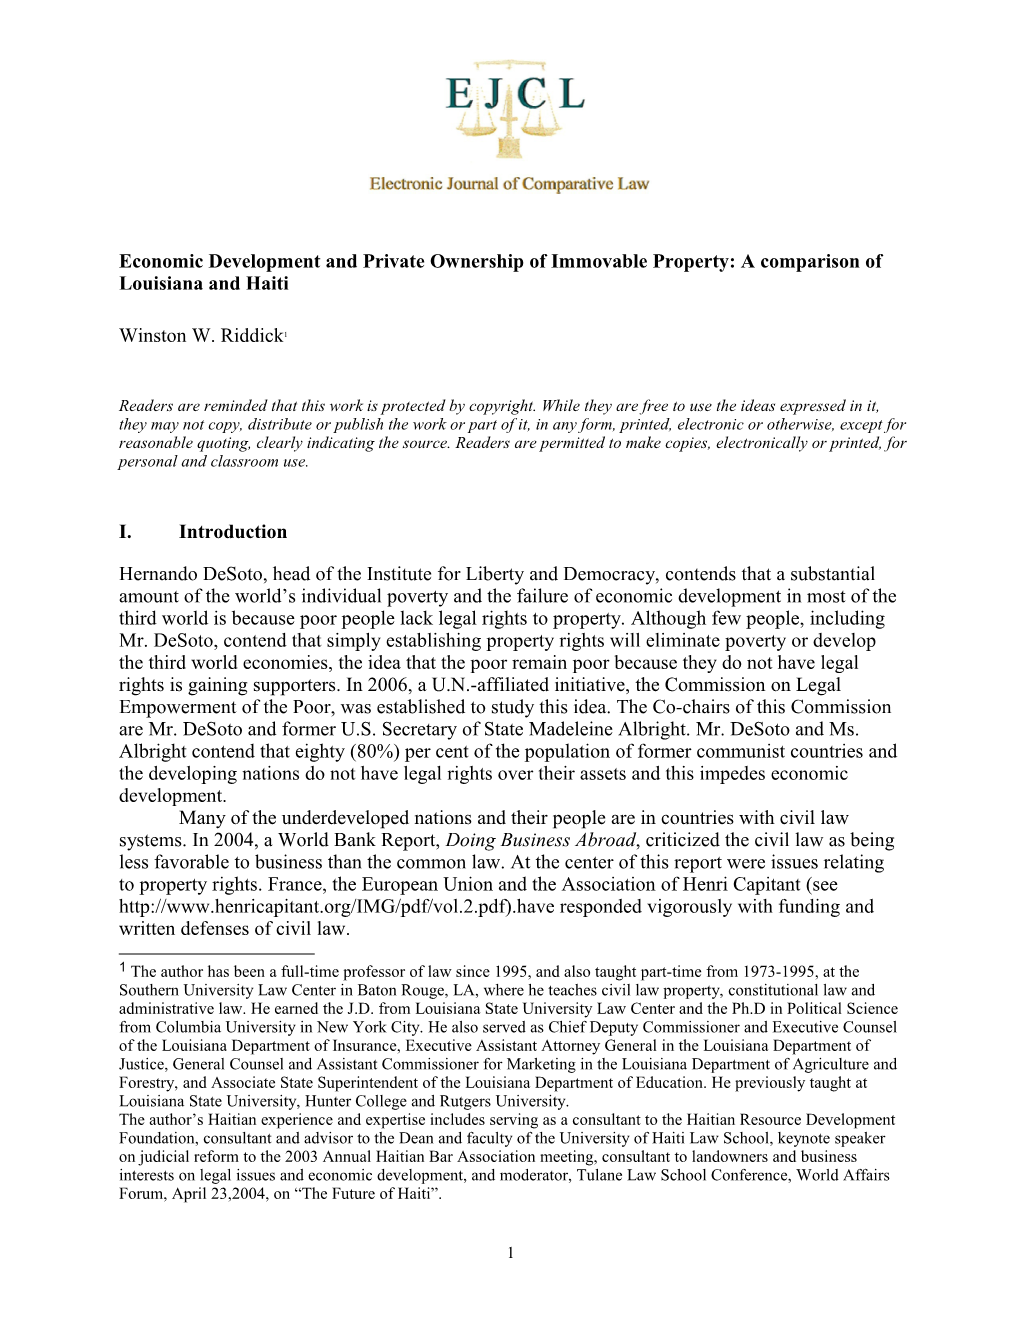 Economic Development and Private Ownership of Immovable Property: a Comparison of Louisiana